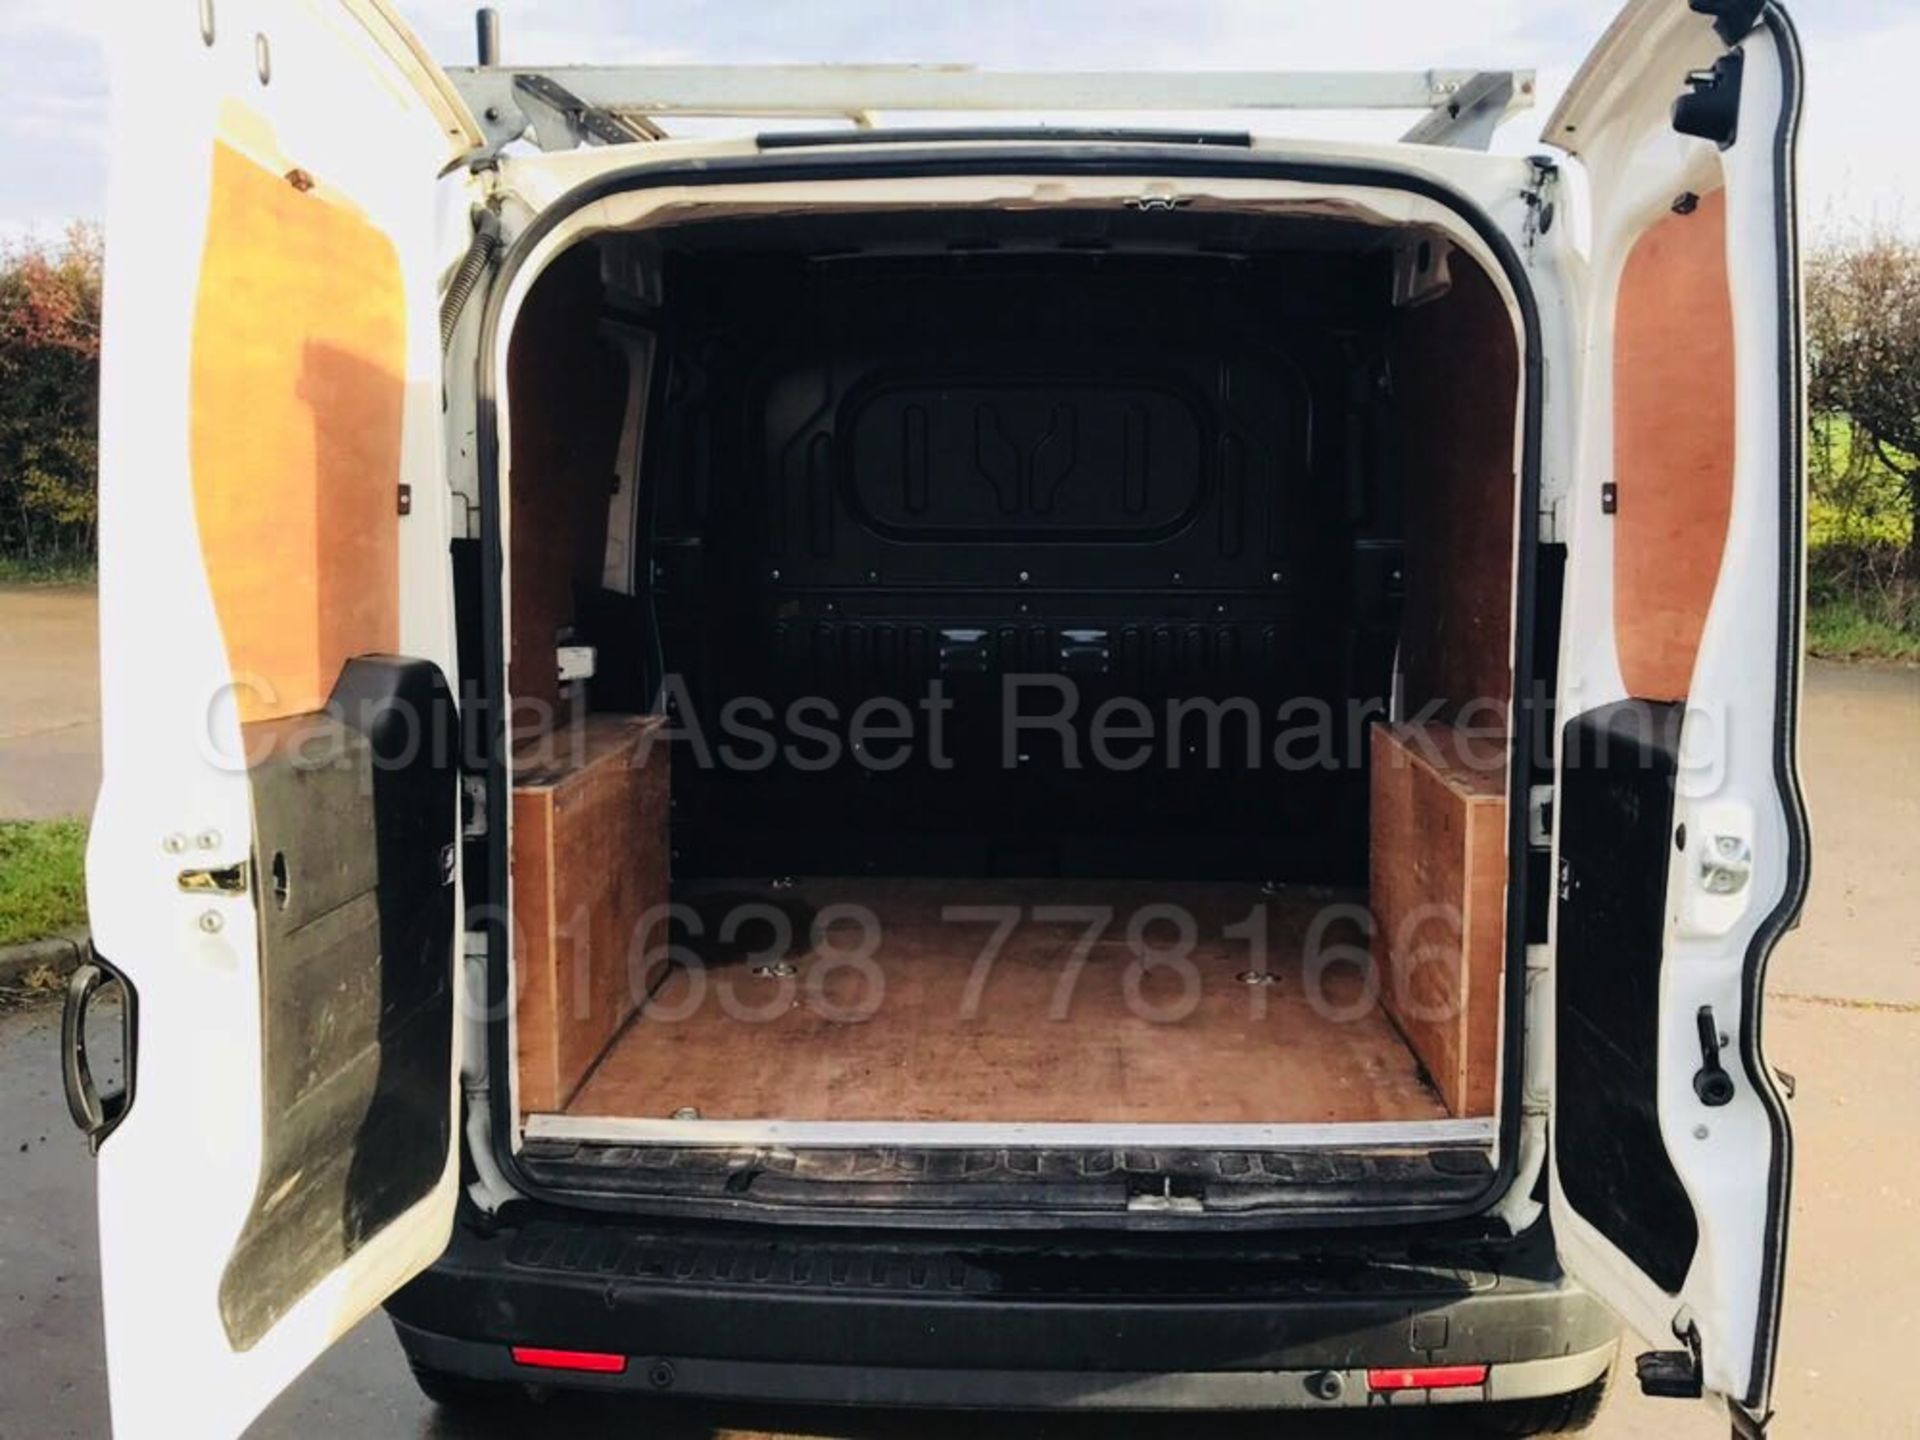 VAUXHALL COMBO 2000 L1H1 (2012 - NEW MODEL) '1.6 CDTI - 105 BHP - STOP / START' (1 OWNER FROM NEW) - Image 13 of 15